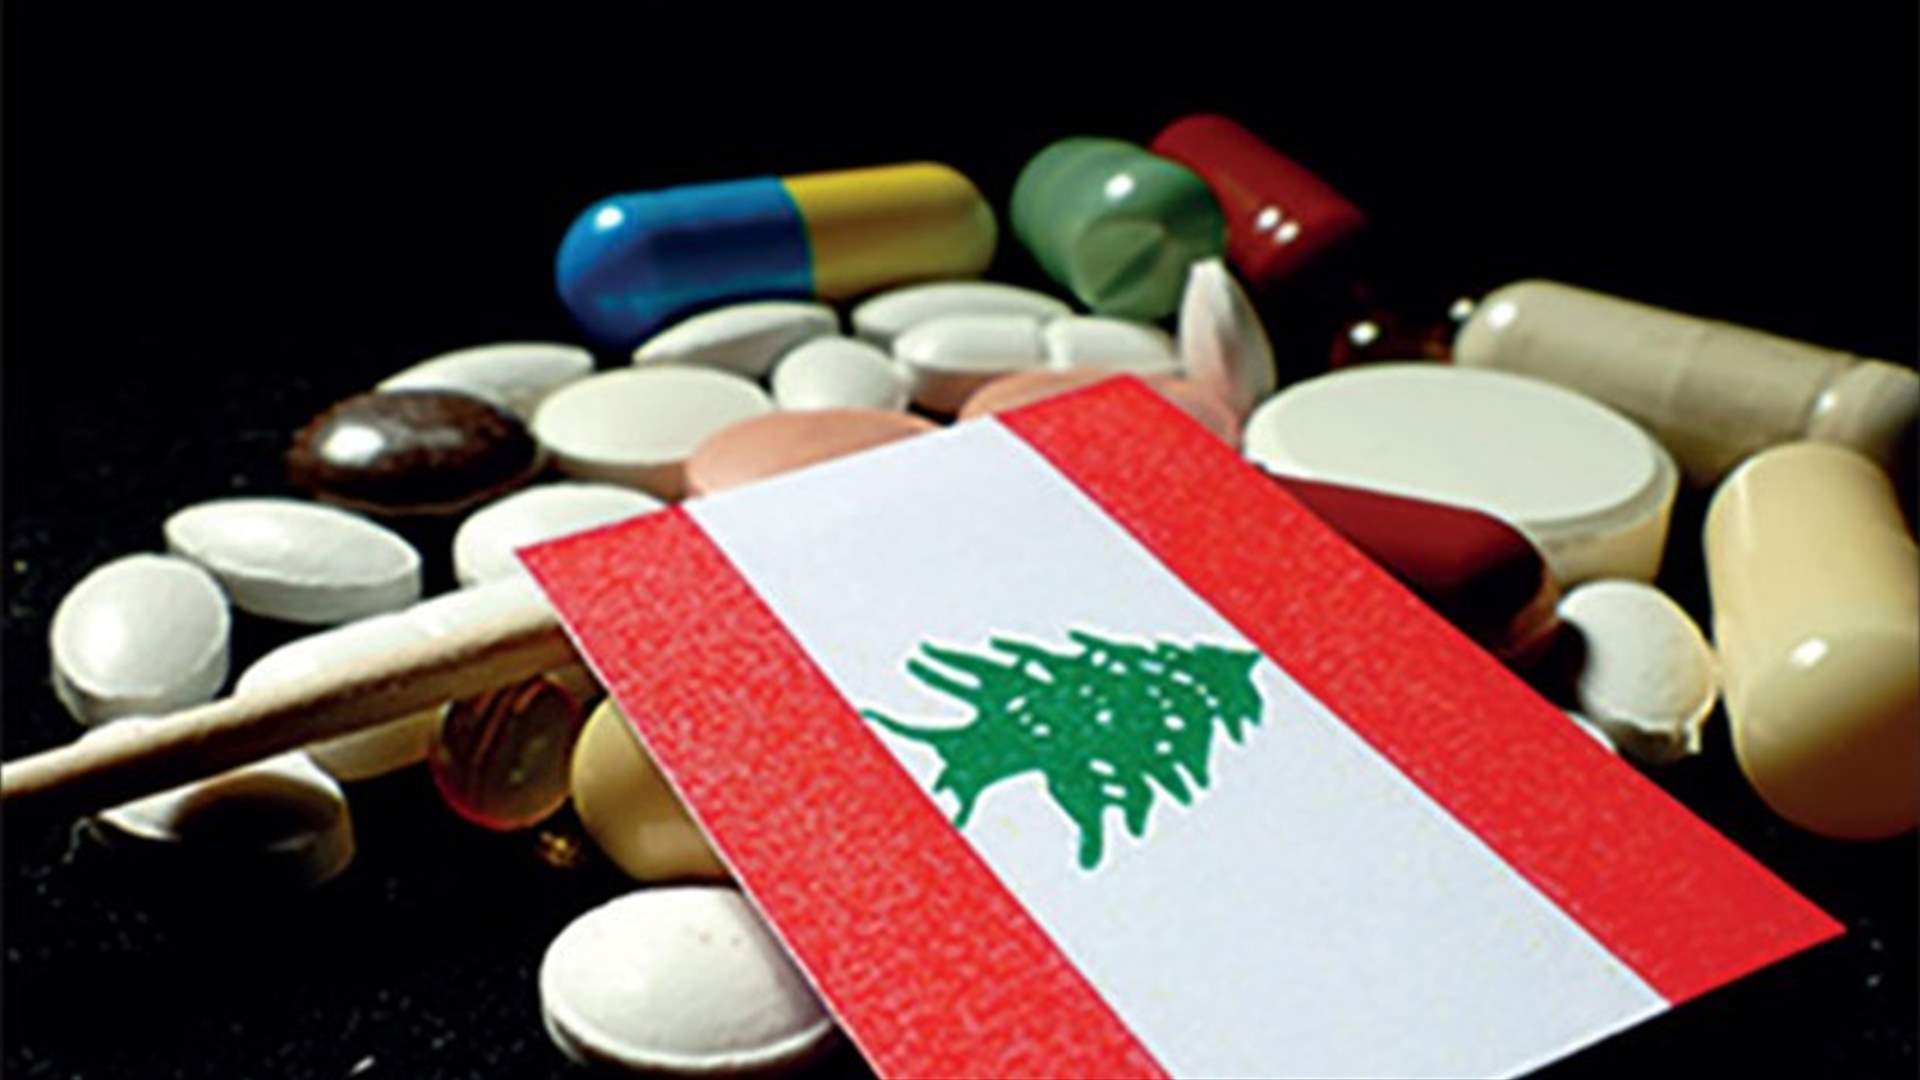 WHO identifies contaminated cancer drugs in Lebanon